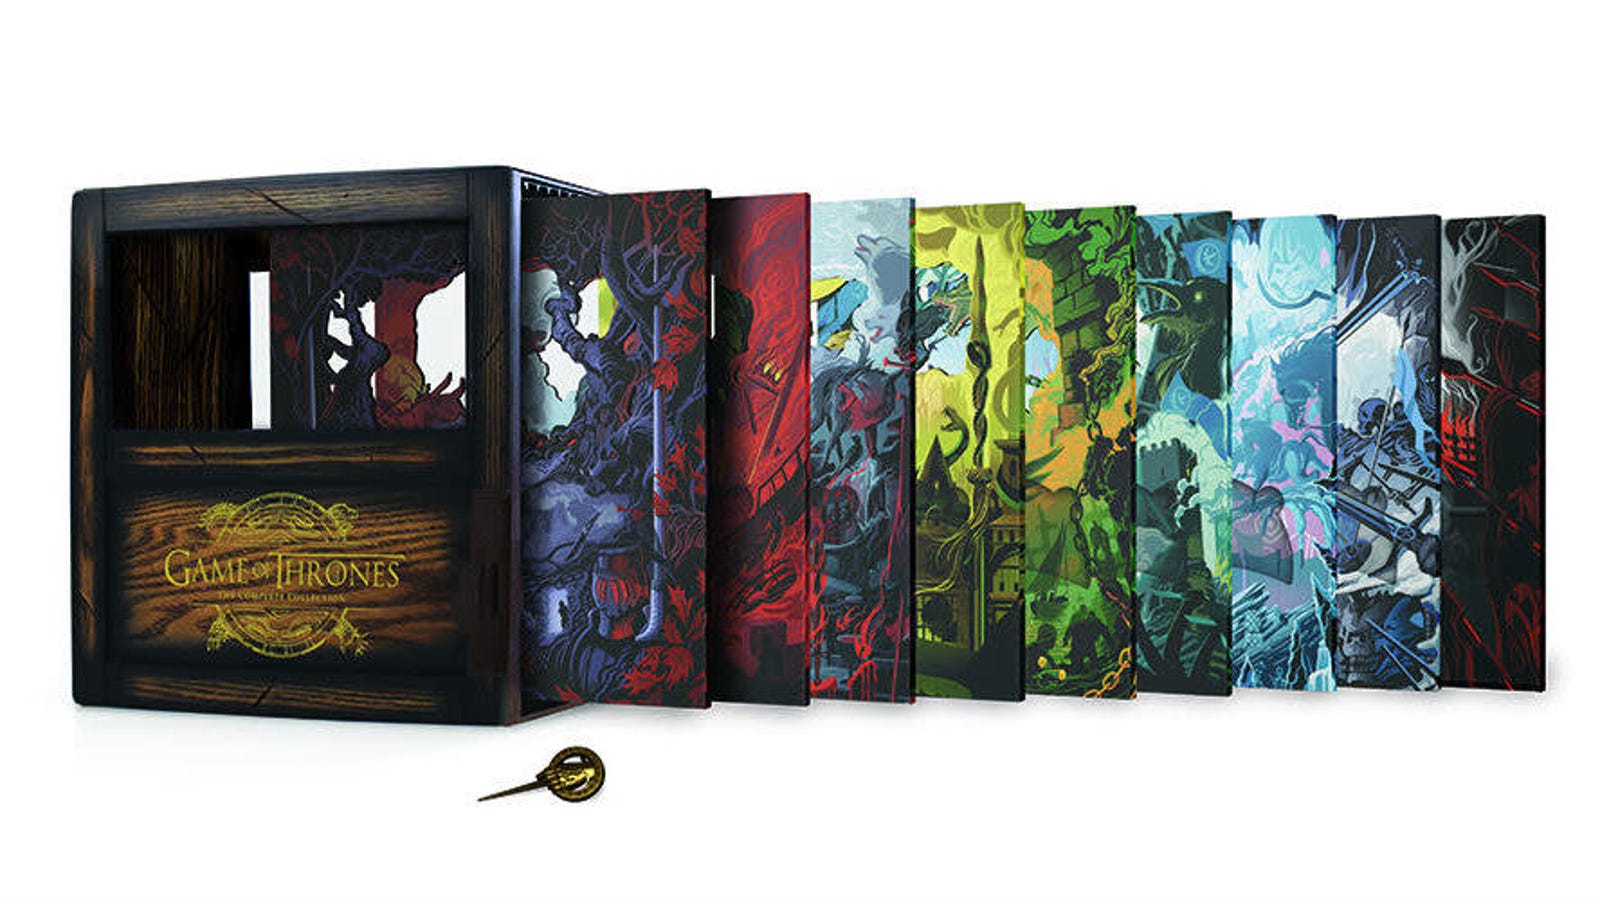 Game of Thrones Limited Edition Complete Series Box Set